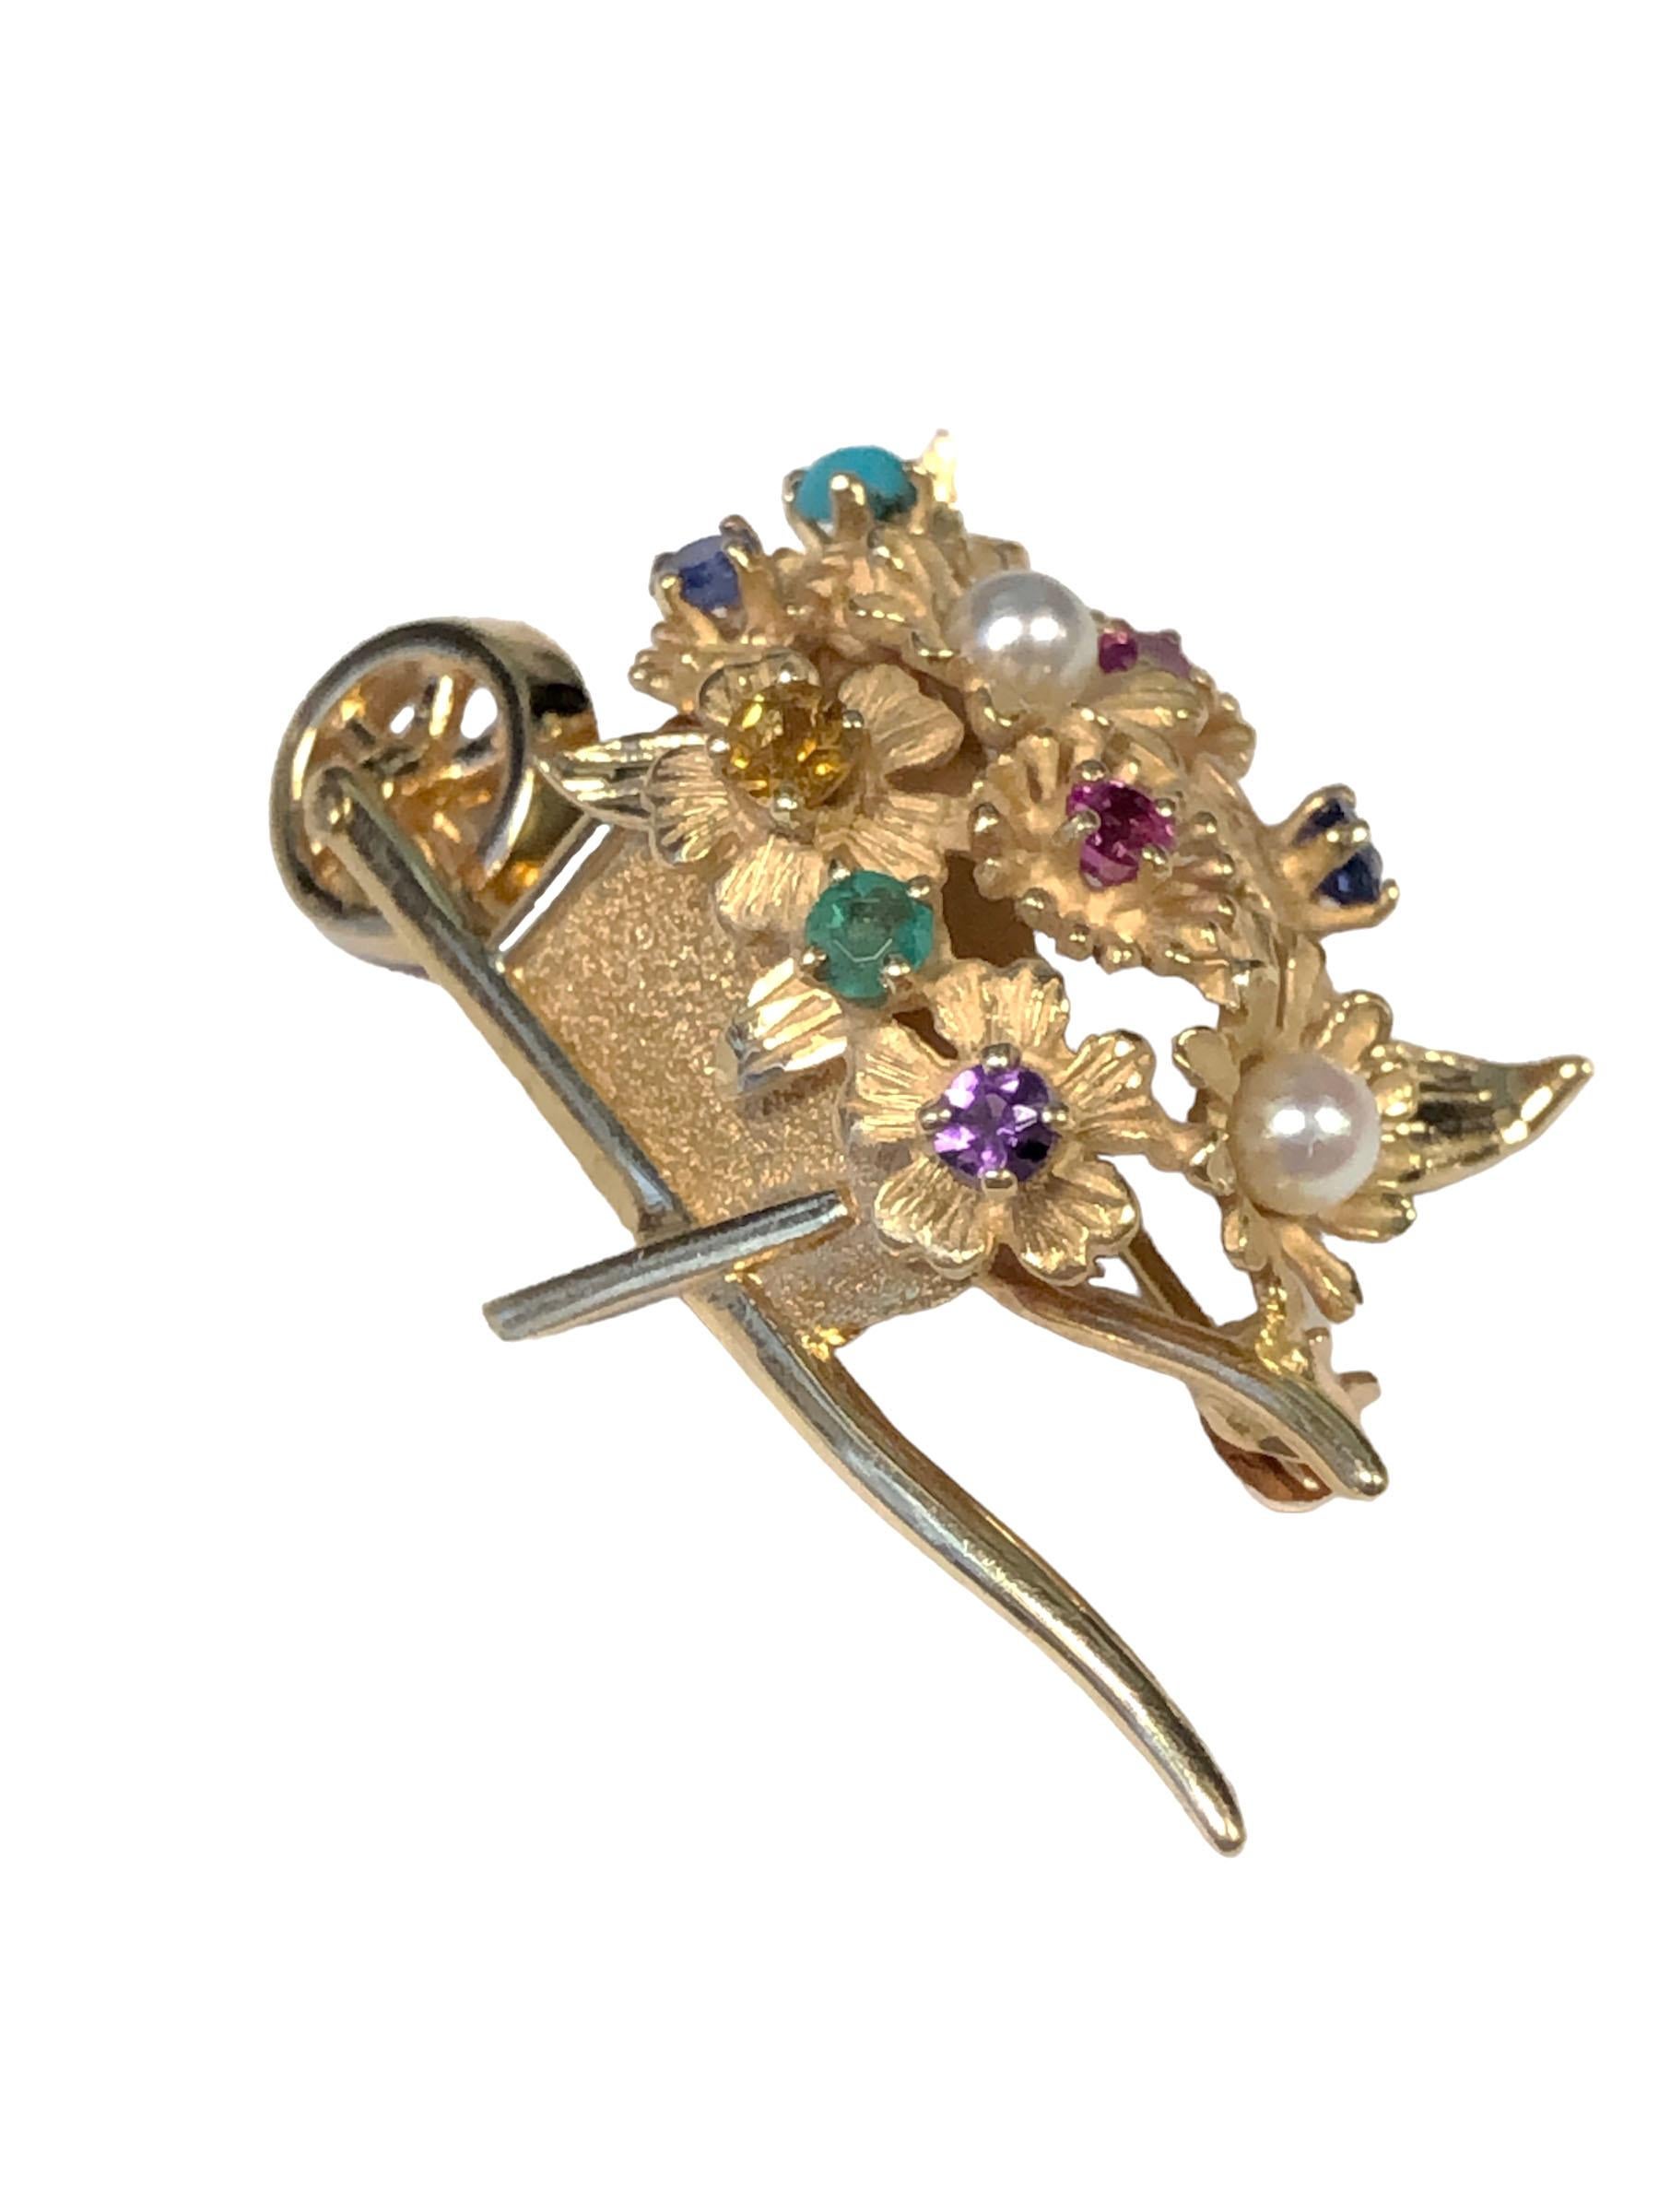 Vintage Dankner Gold and Gem set Whimsical Wheel Barrow Flower Cart Brooch In Excellent Condition For Sale In Chicago, IL